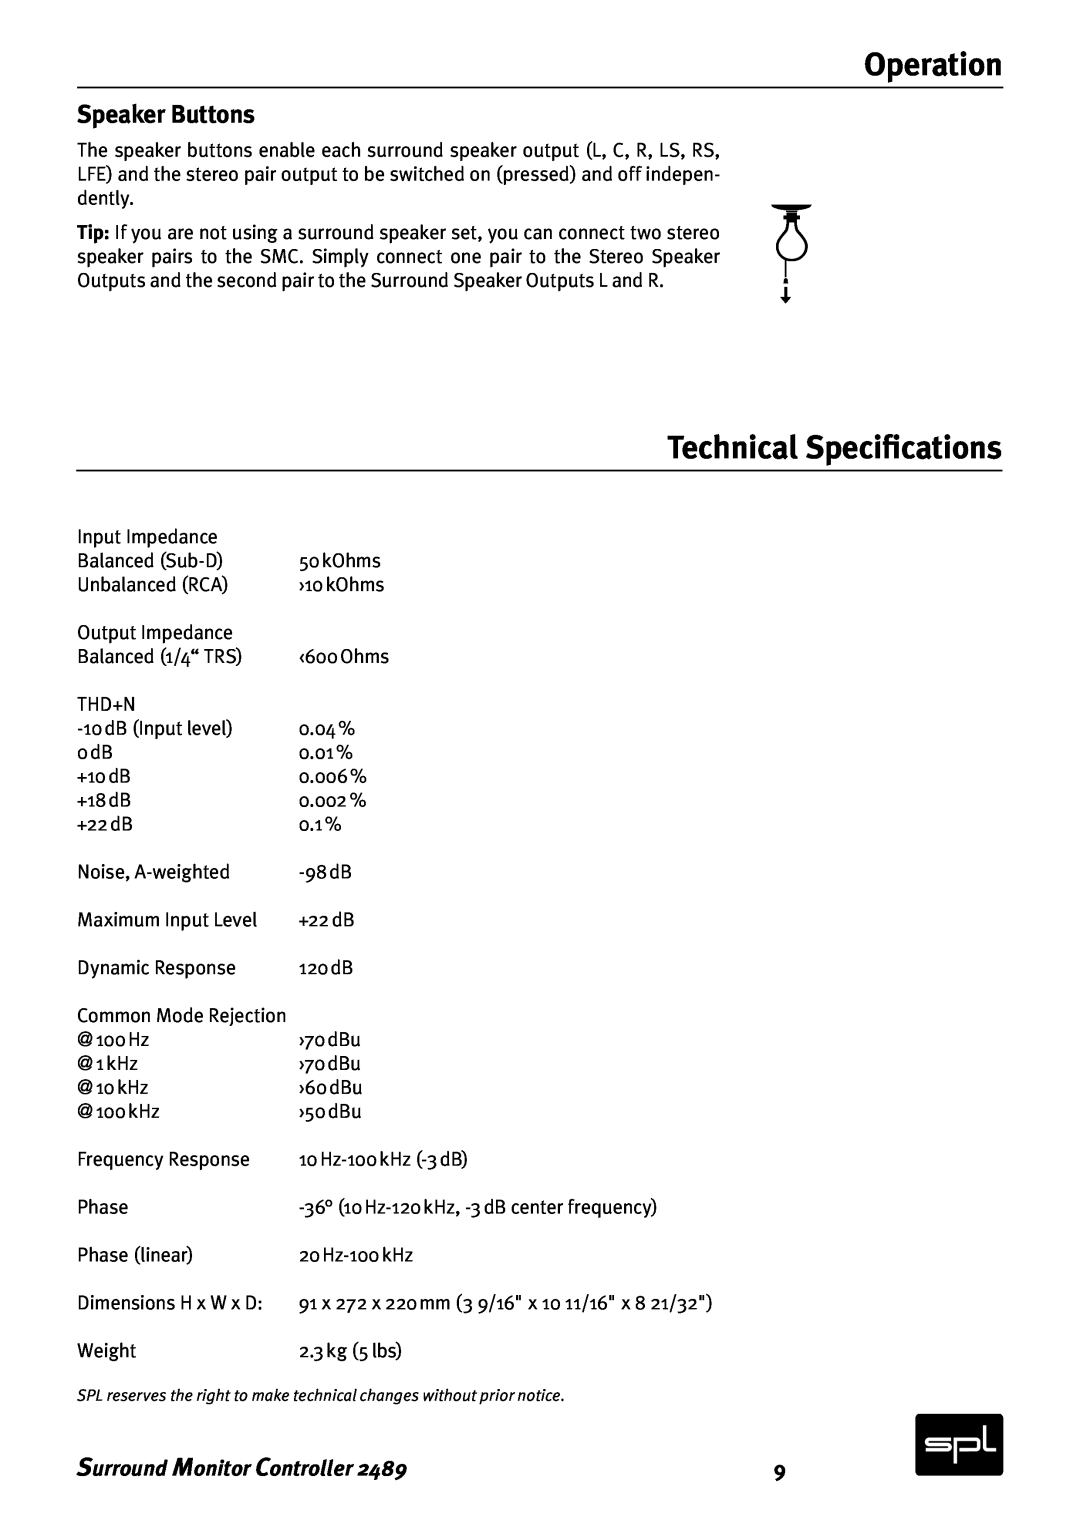 Sound Performance Lab 2489 manual Technical Specifications, Speaker Buttons, Operation, Surround Monitor Controller 